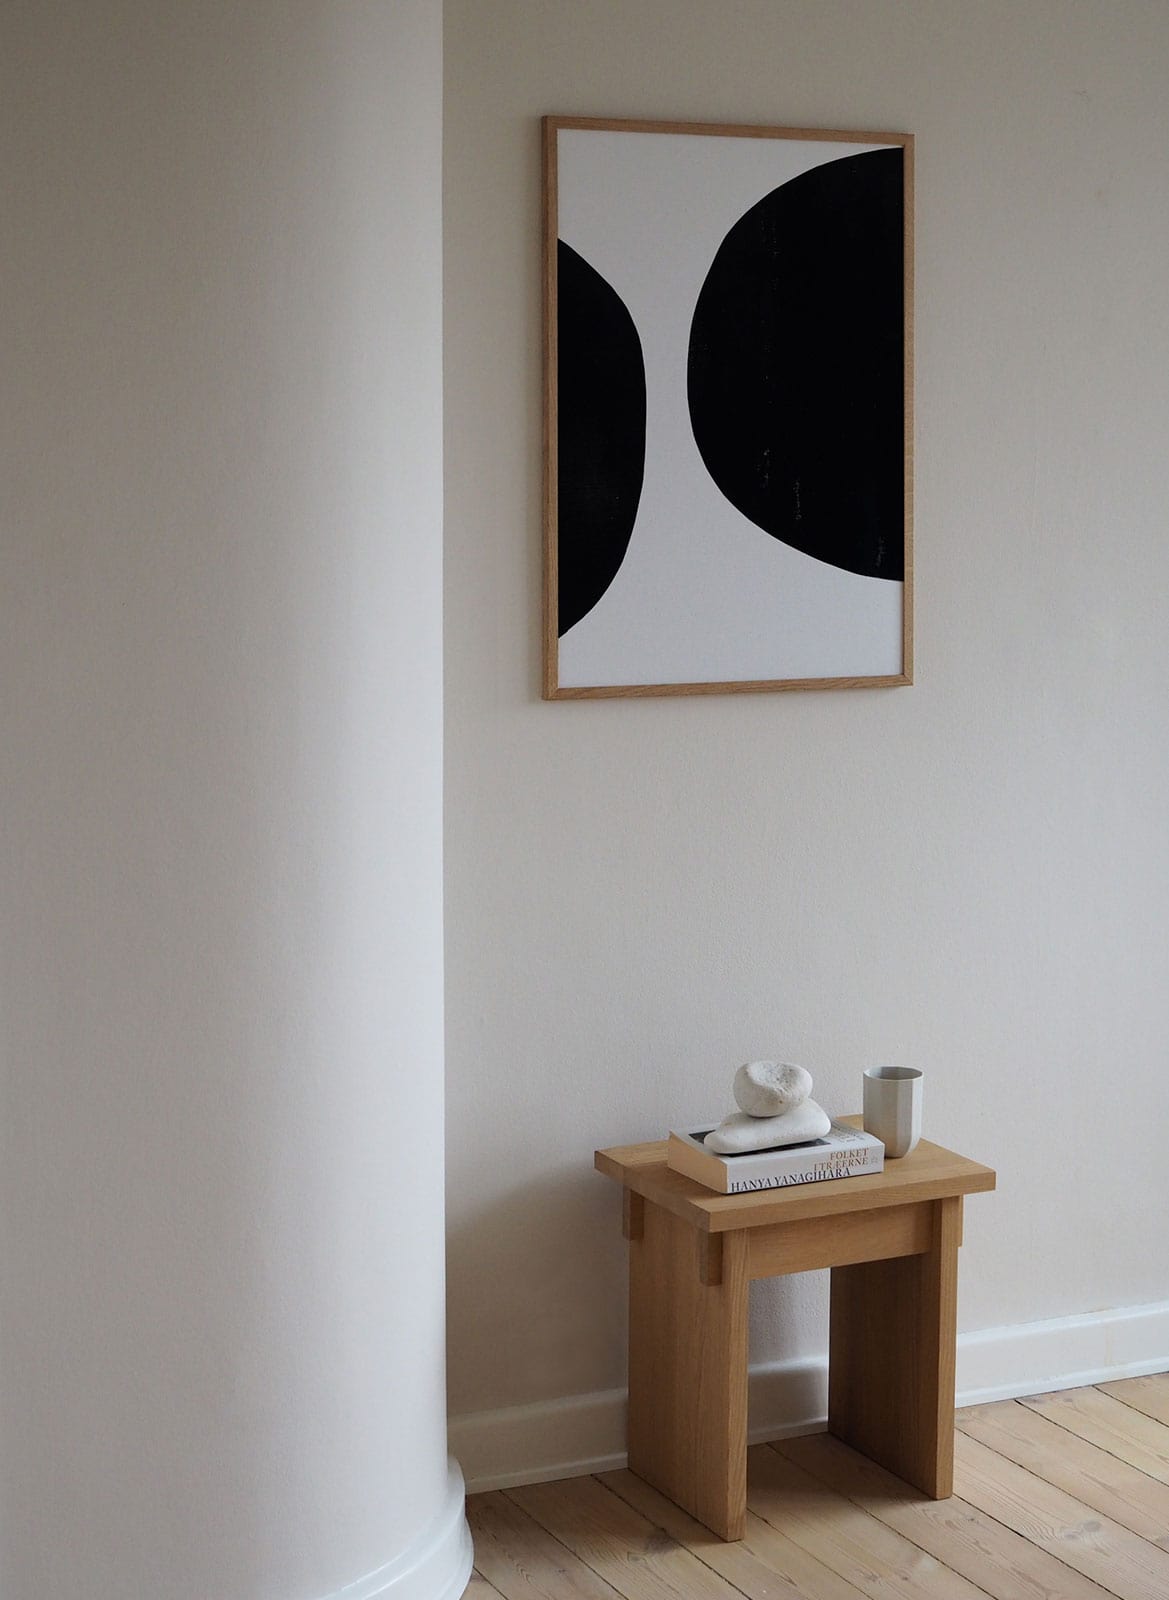 Framed black and white poster hanging in a living room by Atelier Cph